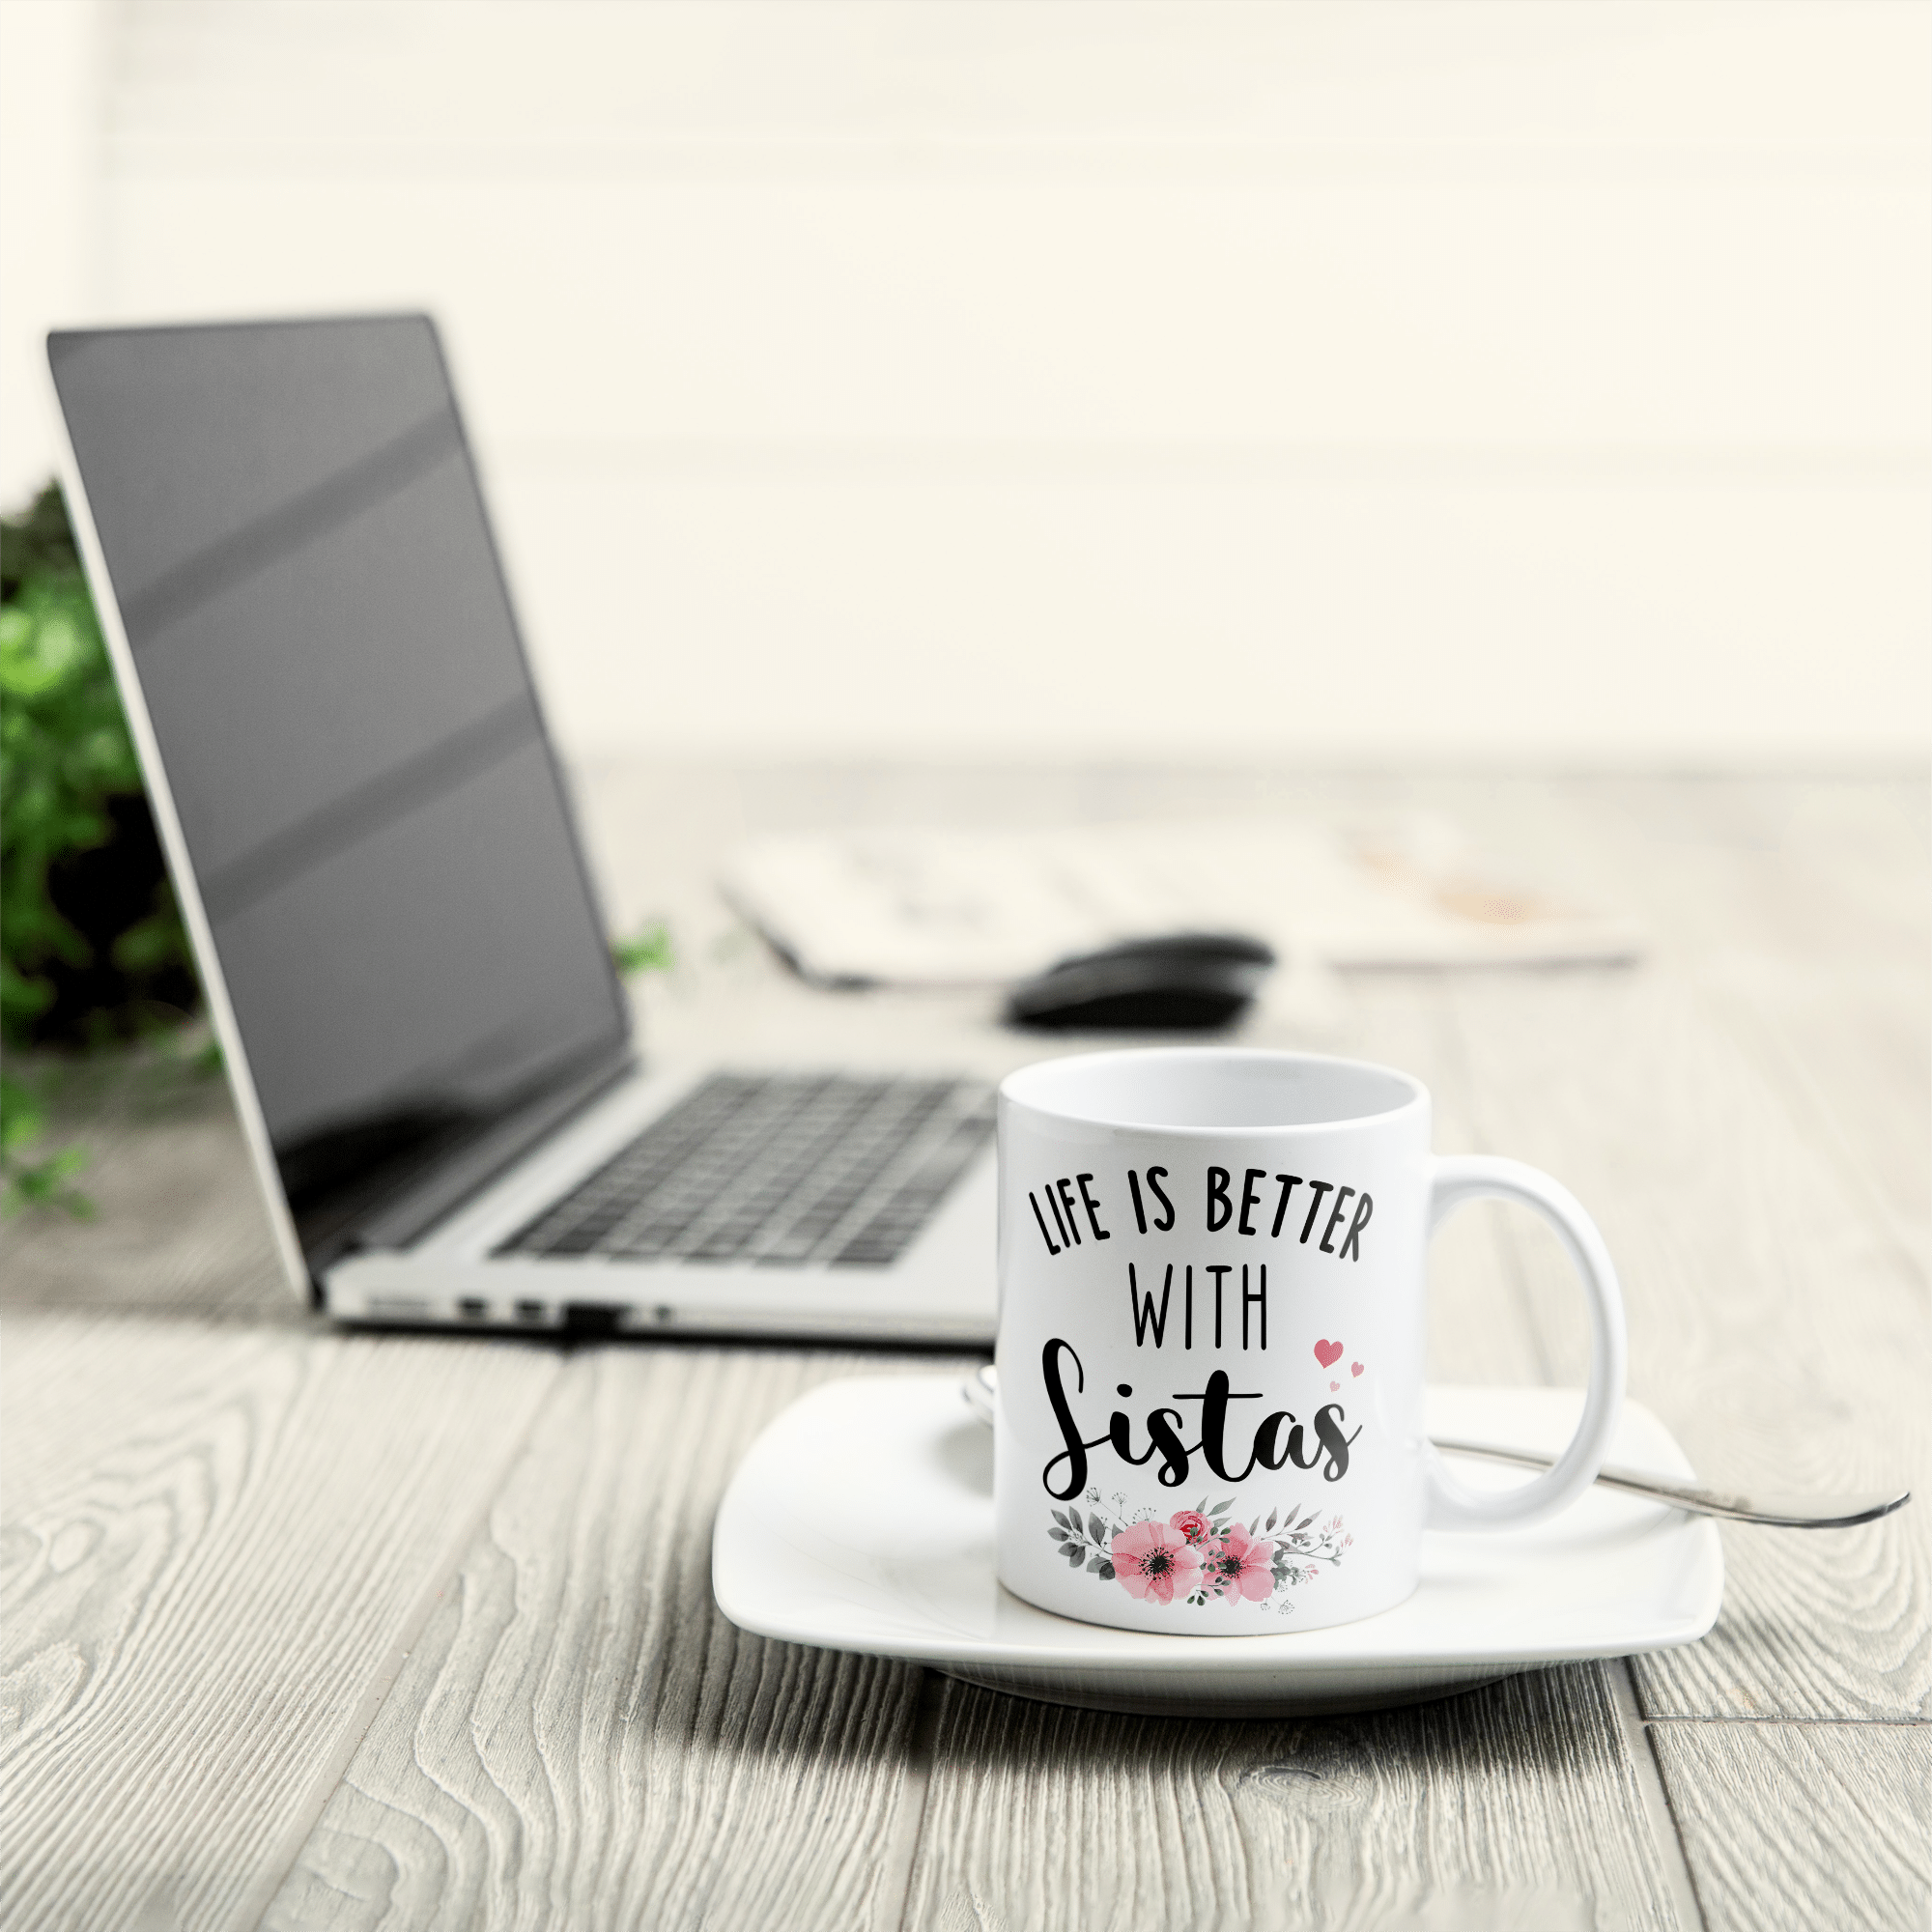 Life Is Better With Sistas - Personalized Mug - Birthday Gift For Sistas, Sisters, Besties